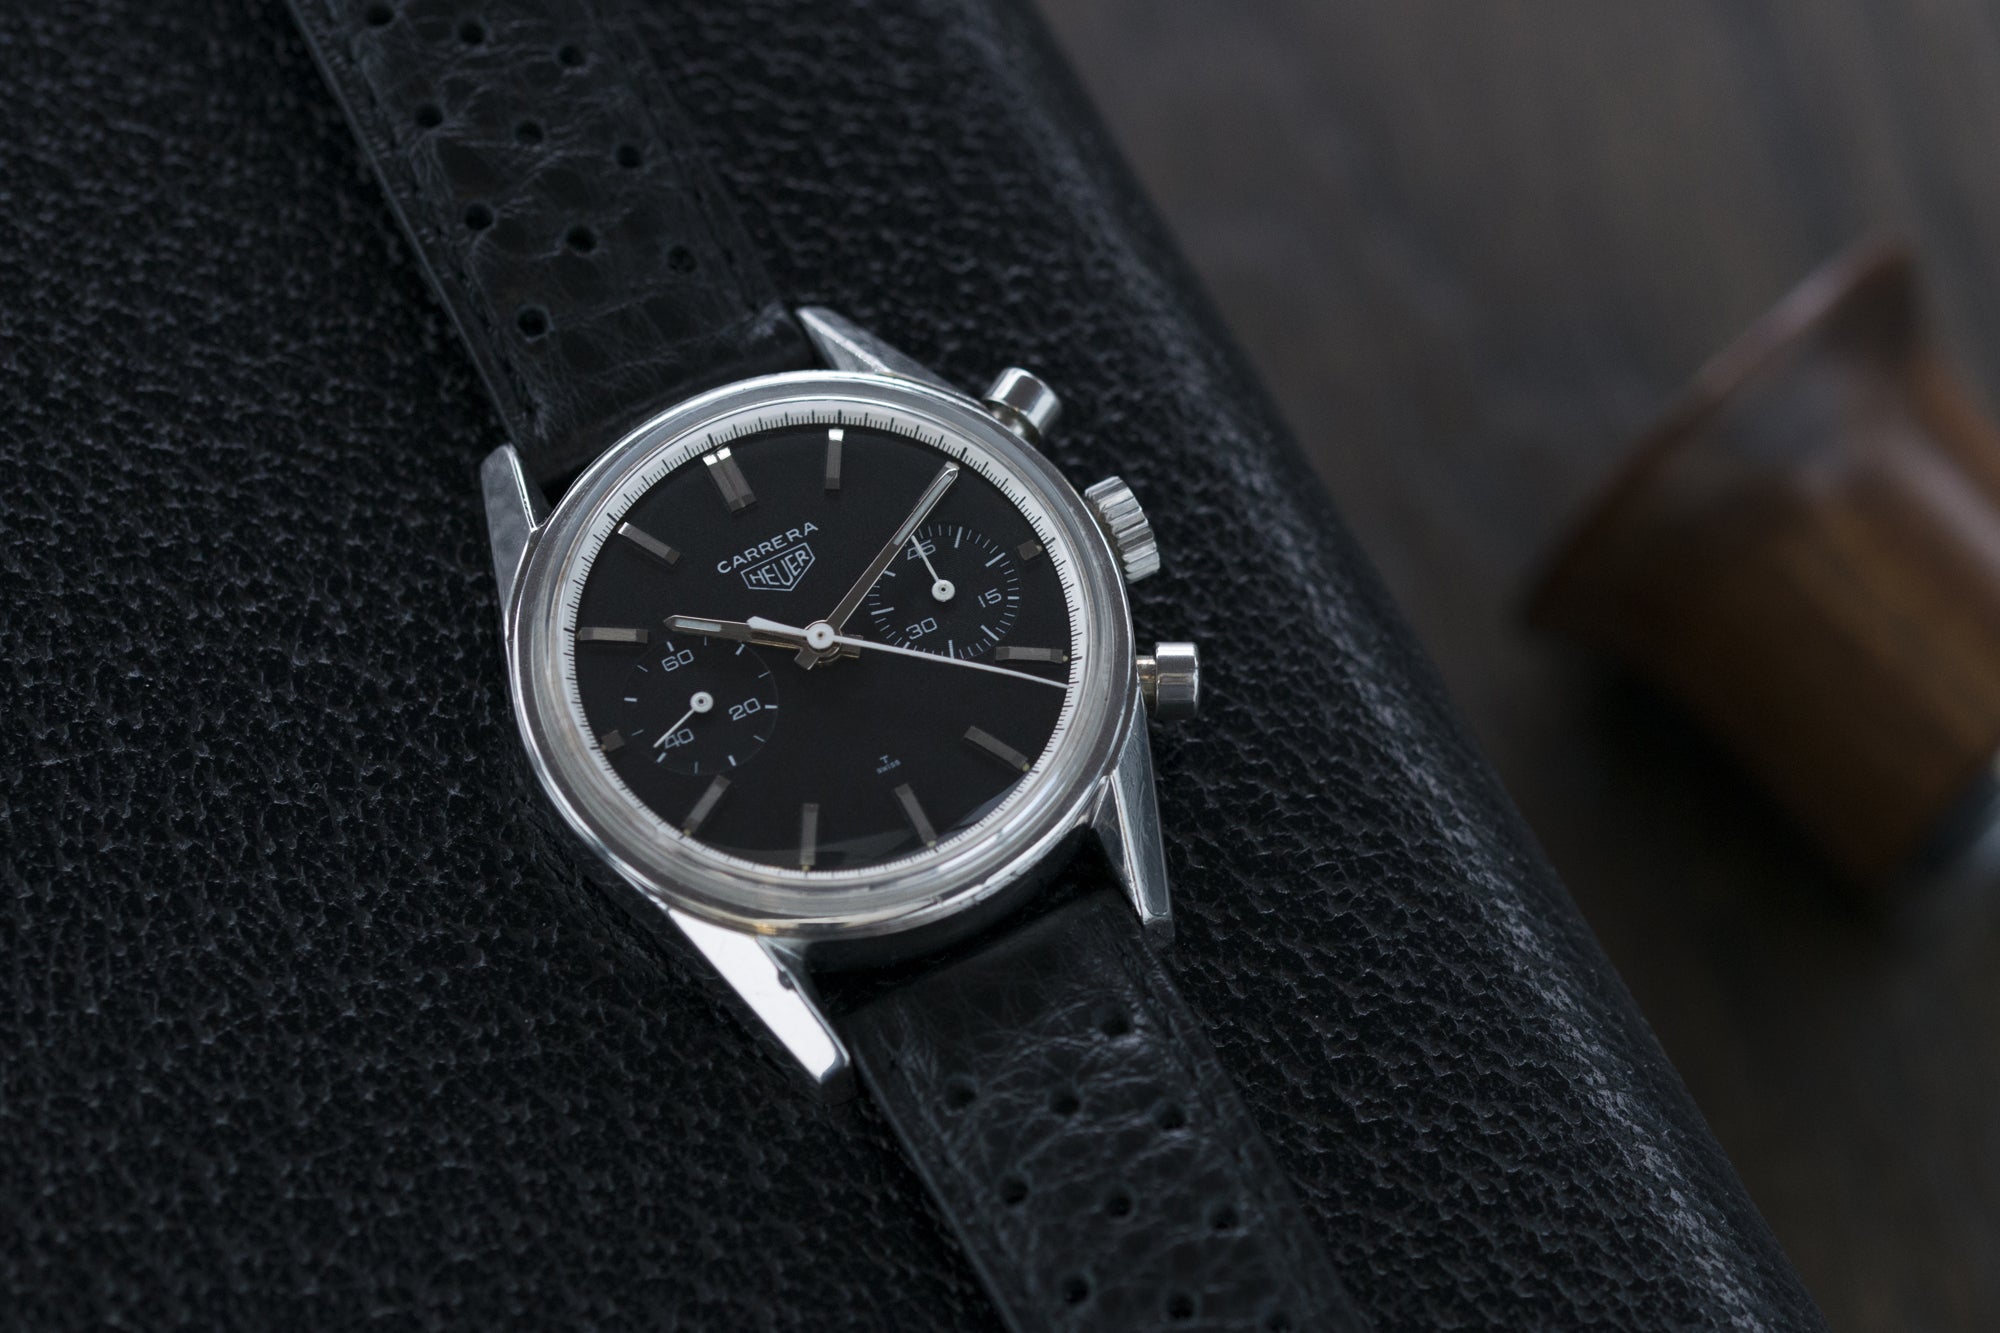 3627N T Swiss black dial Heuer Carrera 3647N chronograph steel watch tritium black dial for sale at A Collected Man London